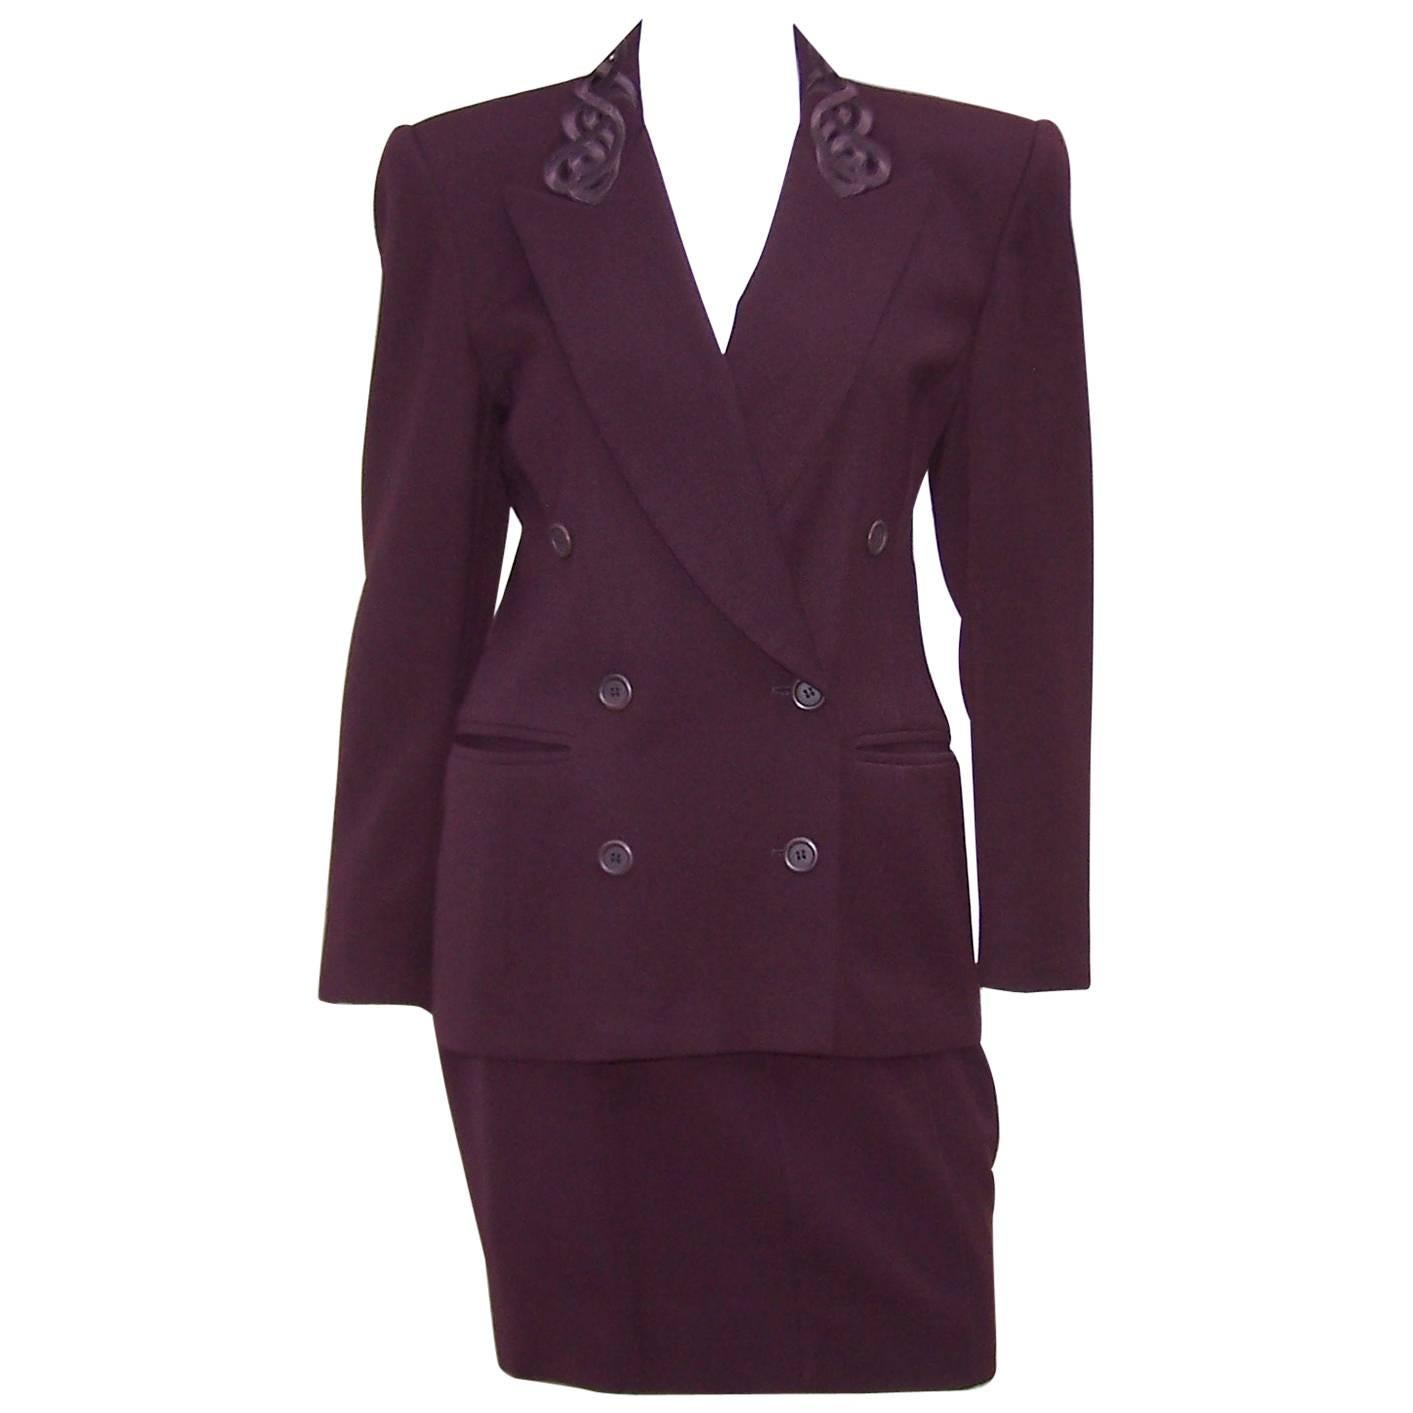 Embroidered 1980's Escada Aubergine Skirt Suit With Cut Out Collar